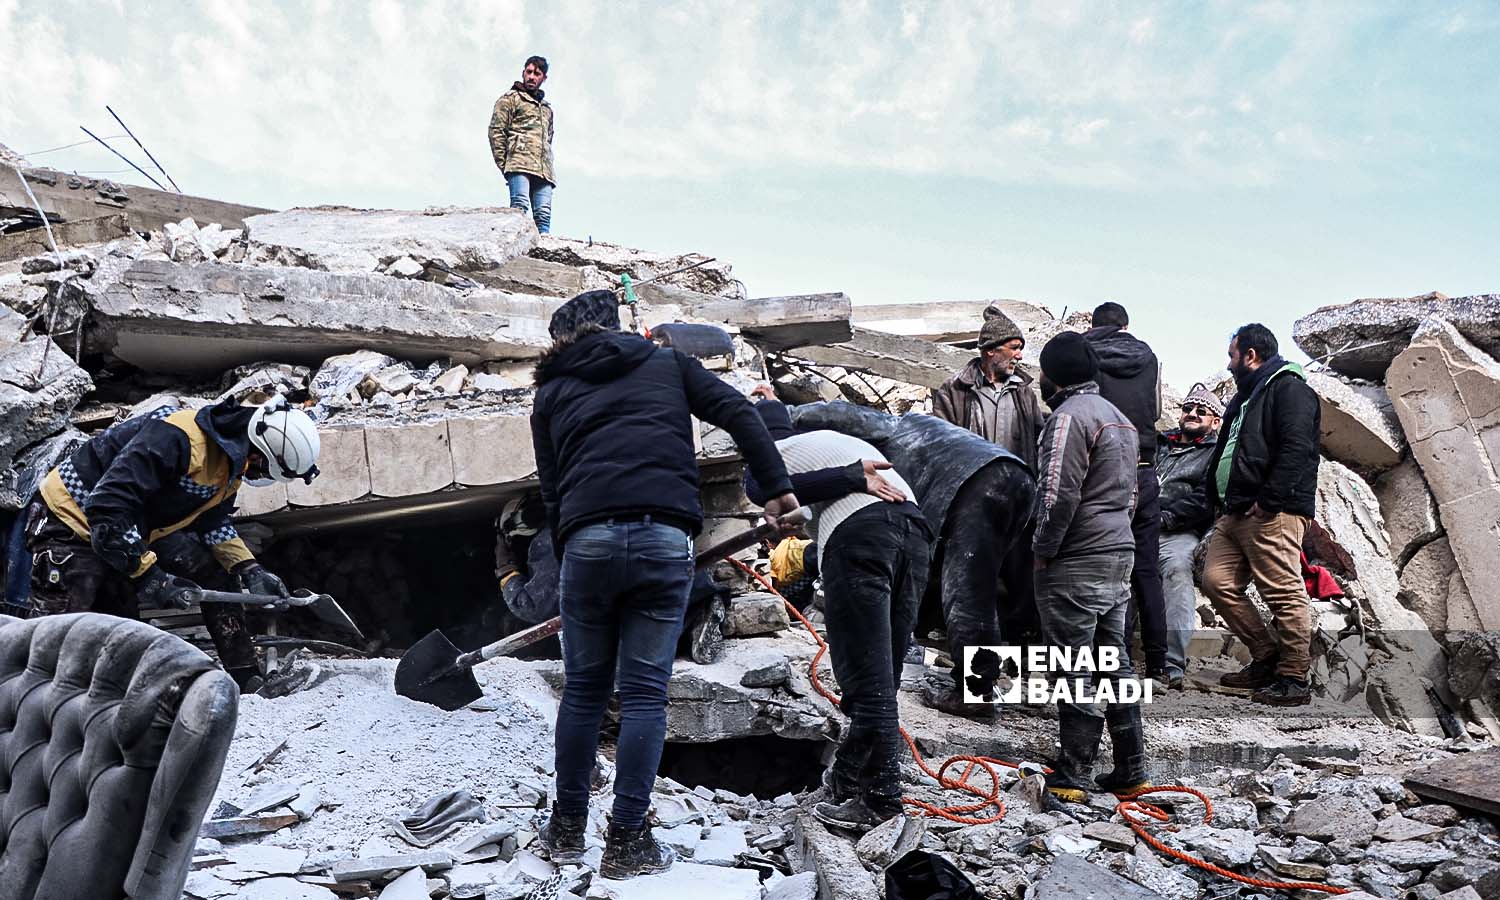 Volunteers try to rescue and lift survivors from under the rubble in Azmarin village following the earthquake that struck the northwestern Syrian region - February 7, 2023 (Enab Baladi/Mohammad Nasan Dabel)
